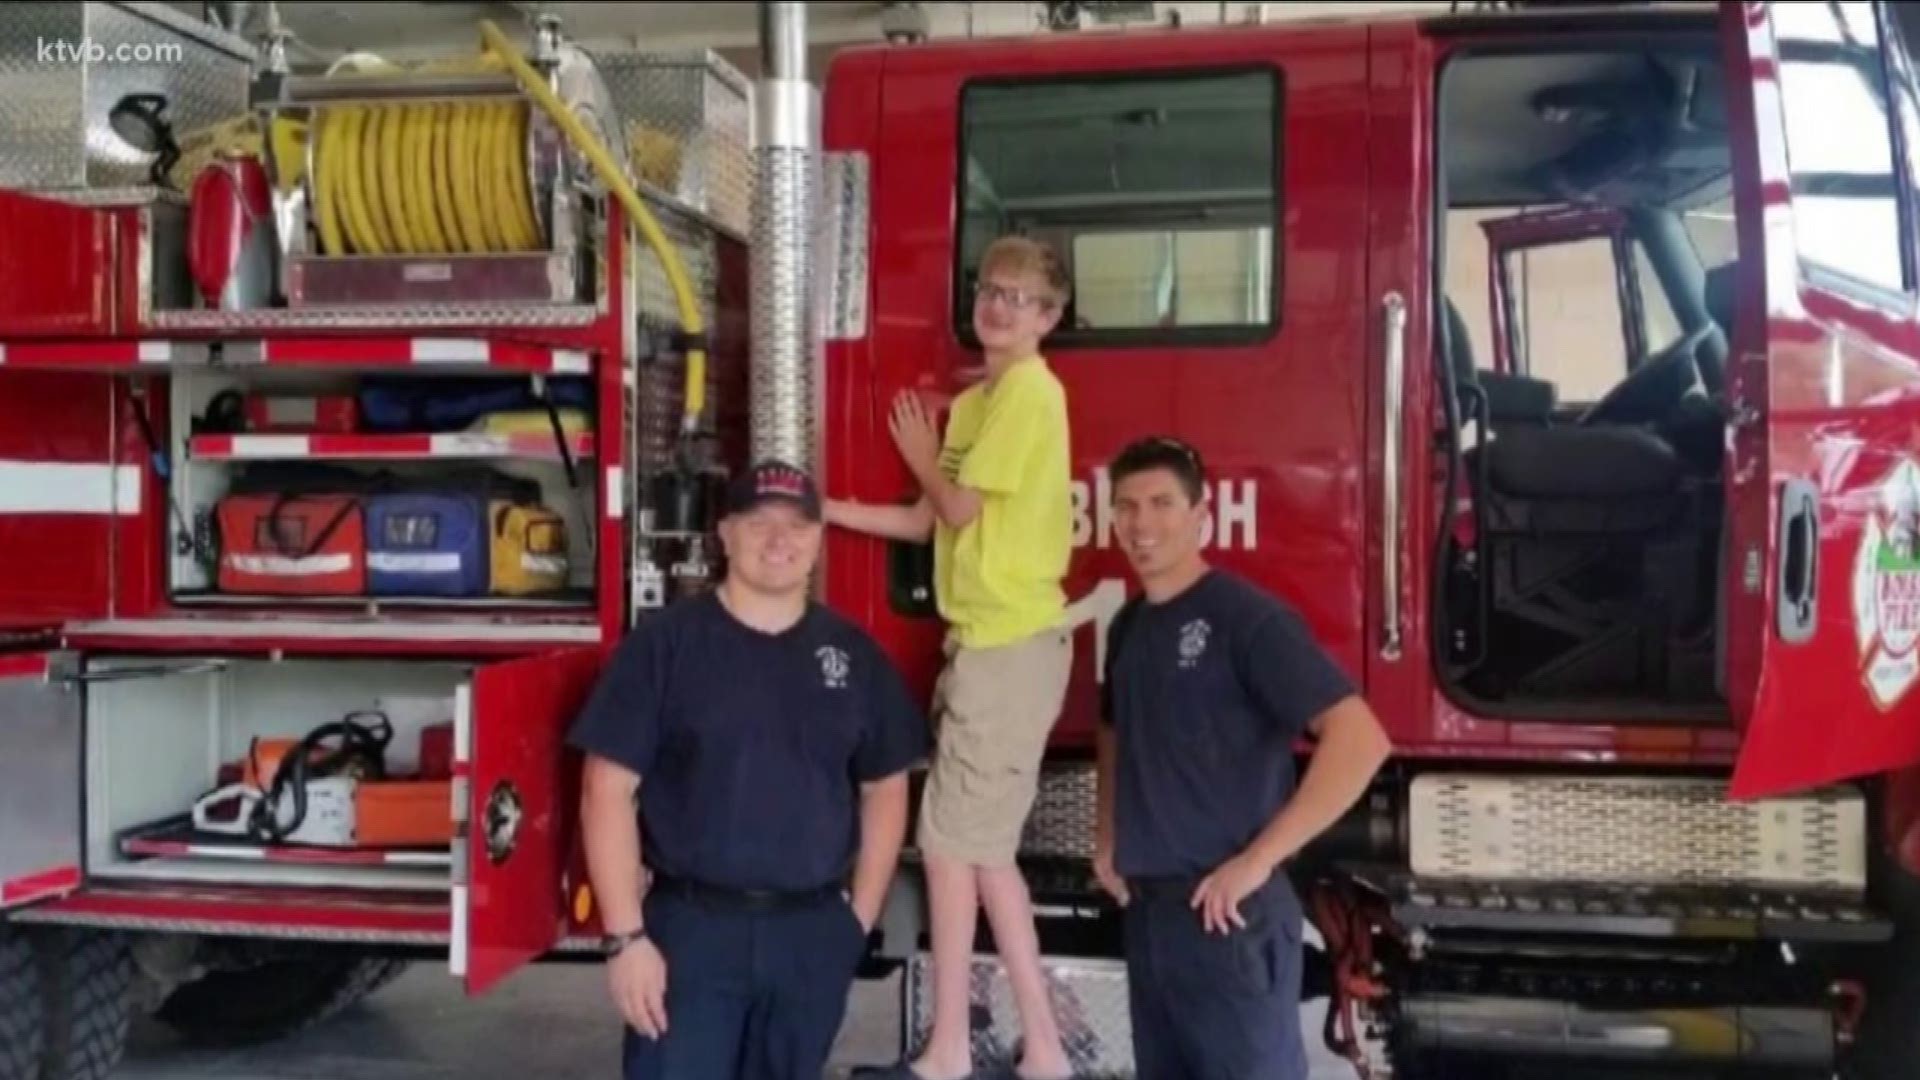 17-year-old Gavin Spears loves fire trucks, and the firefighters at Meridian Station 1 love Gavin. The teen visits the fire station whenever he can, and he's welcomed with open arms.